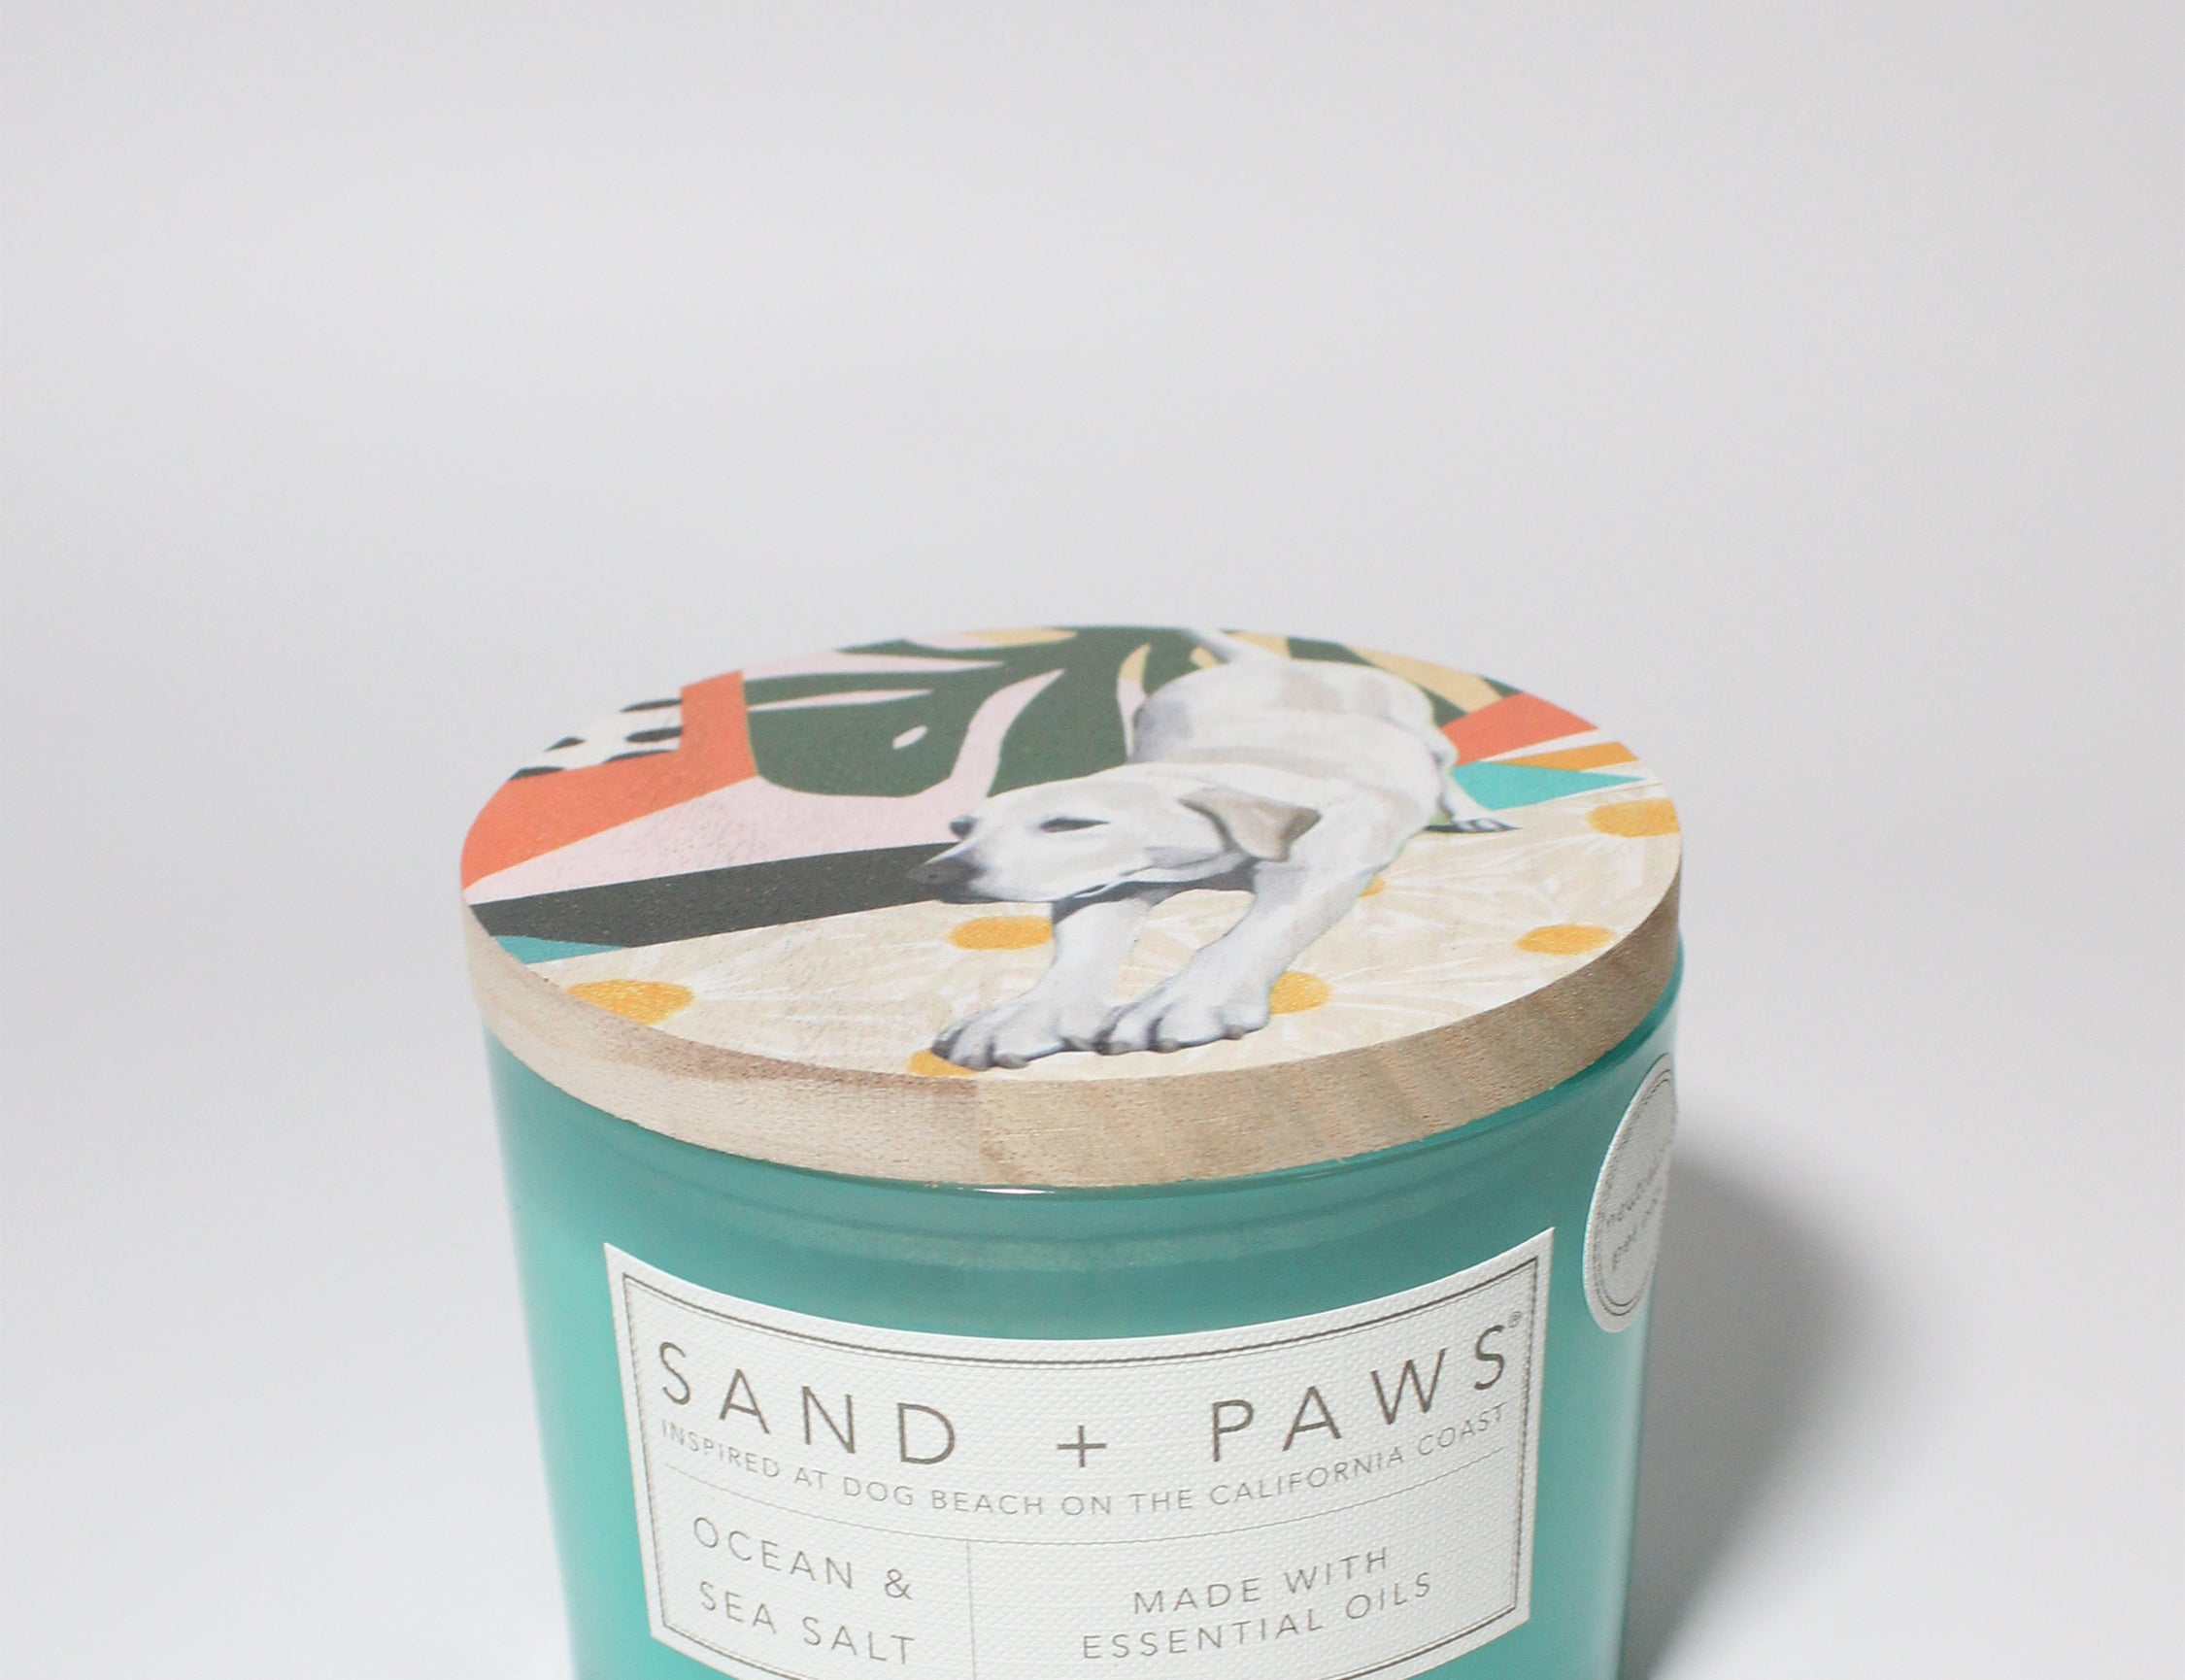 Sand + Paws Ocean & Sea Salt 12 oz scented candle Fiji vessel with Painted Labrador lid